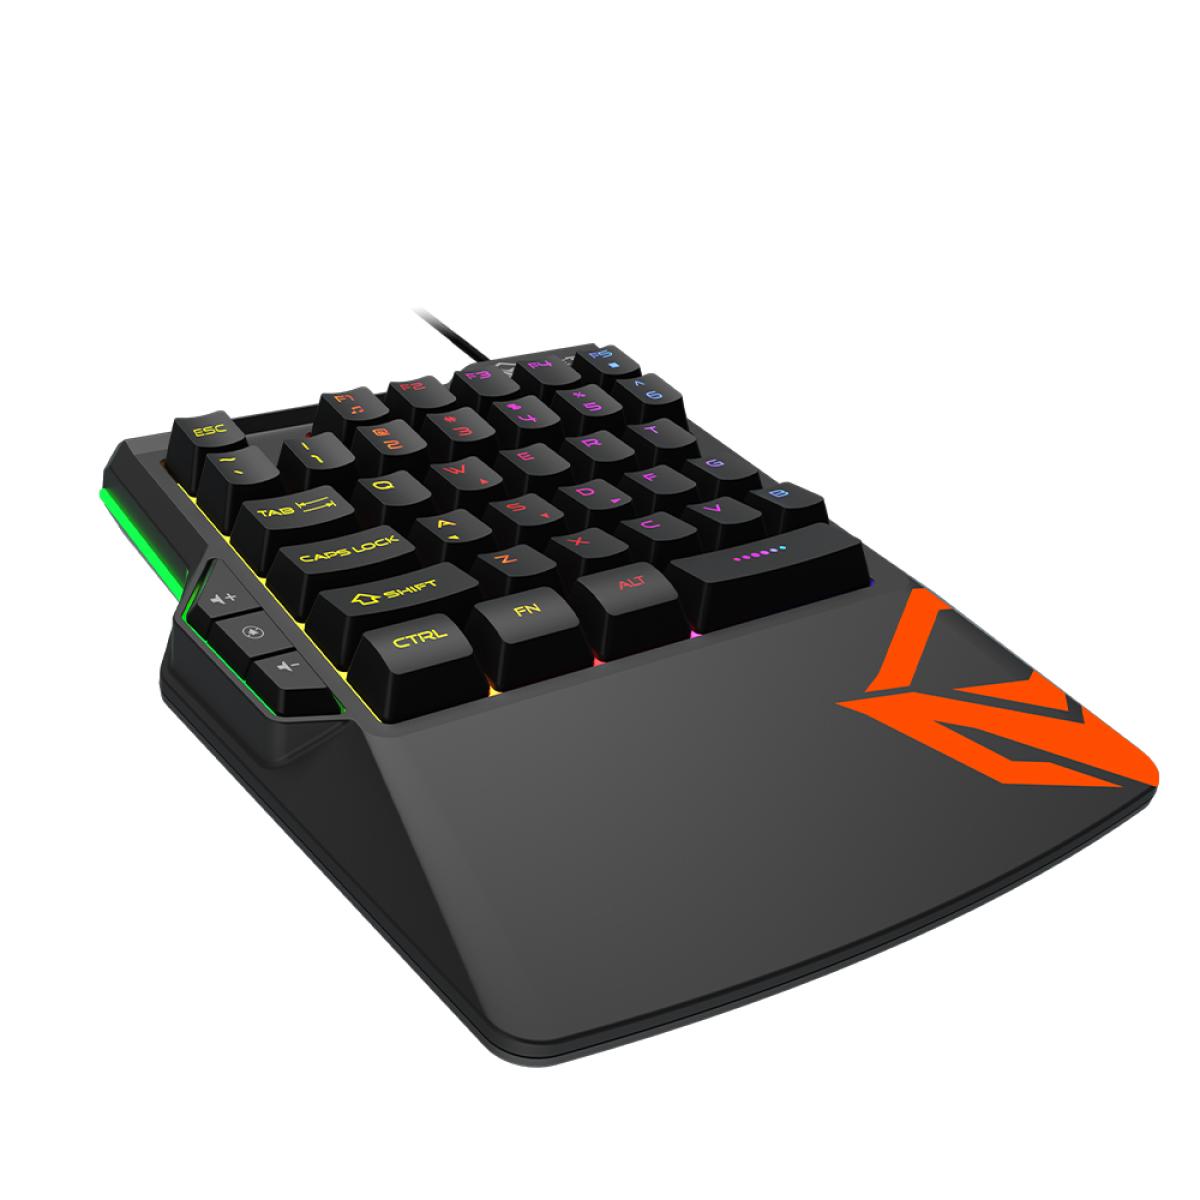 MeeTion Left One-Handed Gaming Keyboard